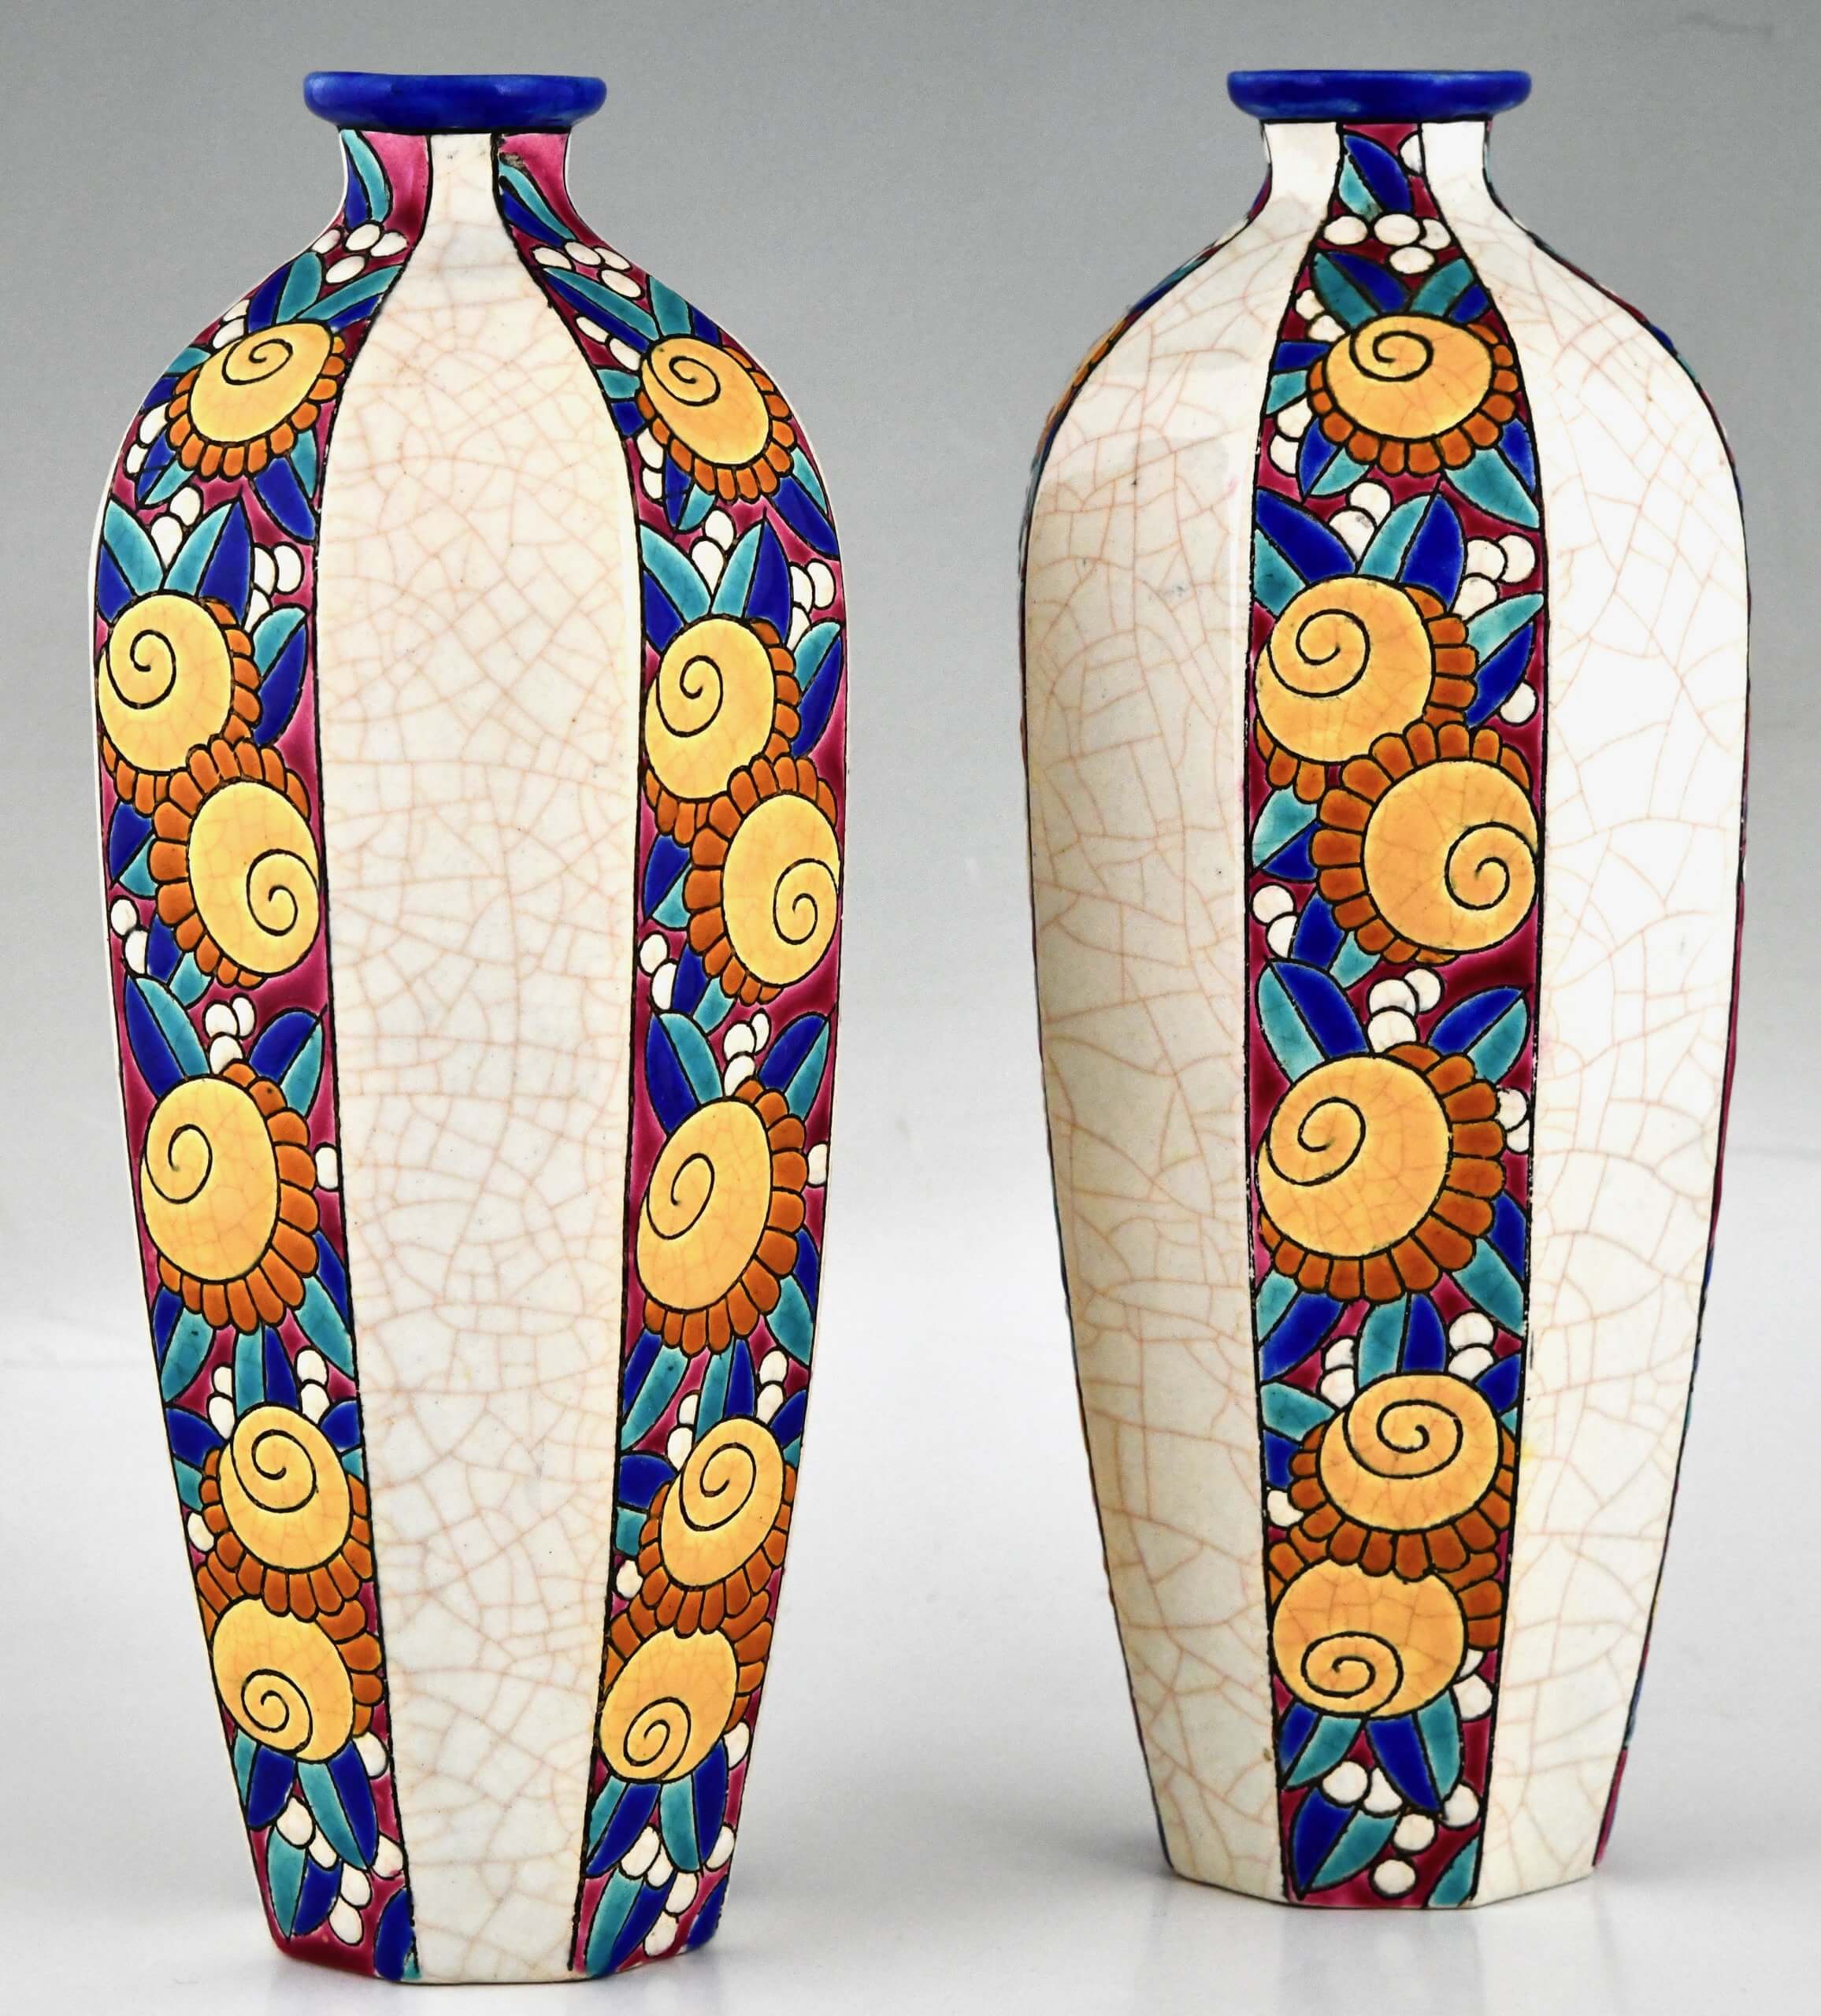 Pair of Art Deco ceramic vases with stylized flowers.